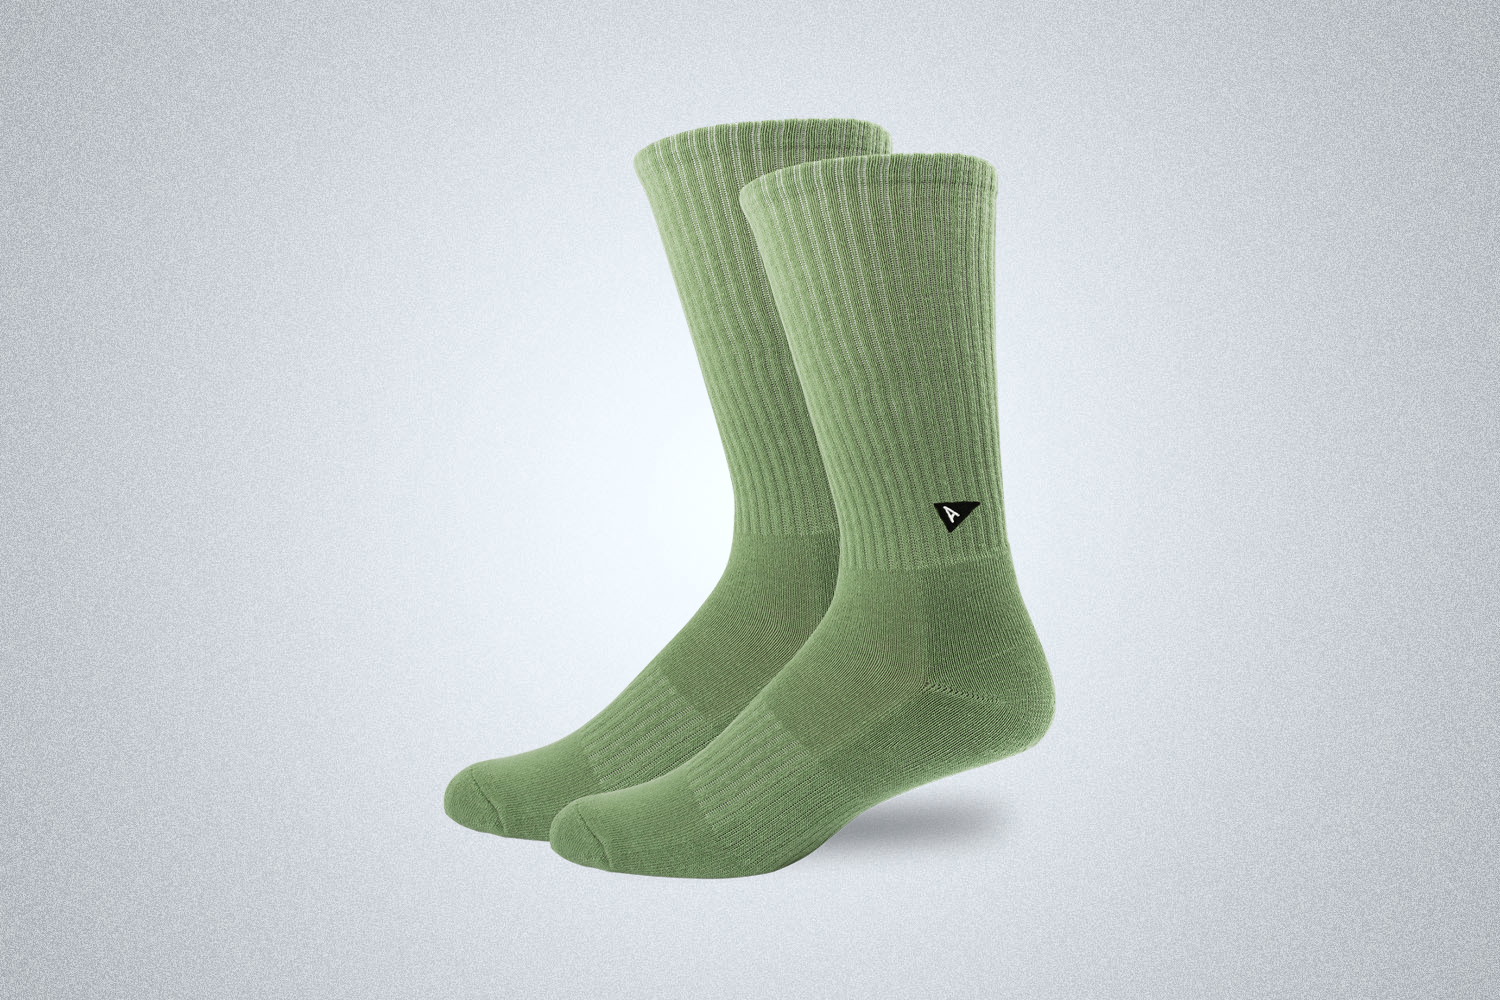 a pair of neon green socks from Arvin Goods